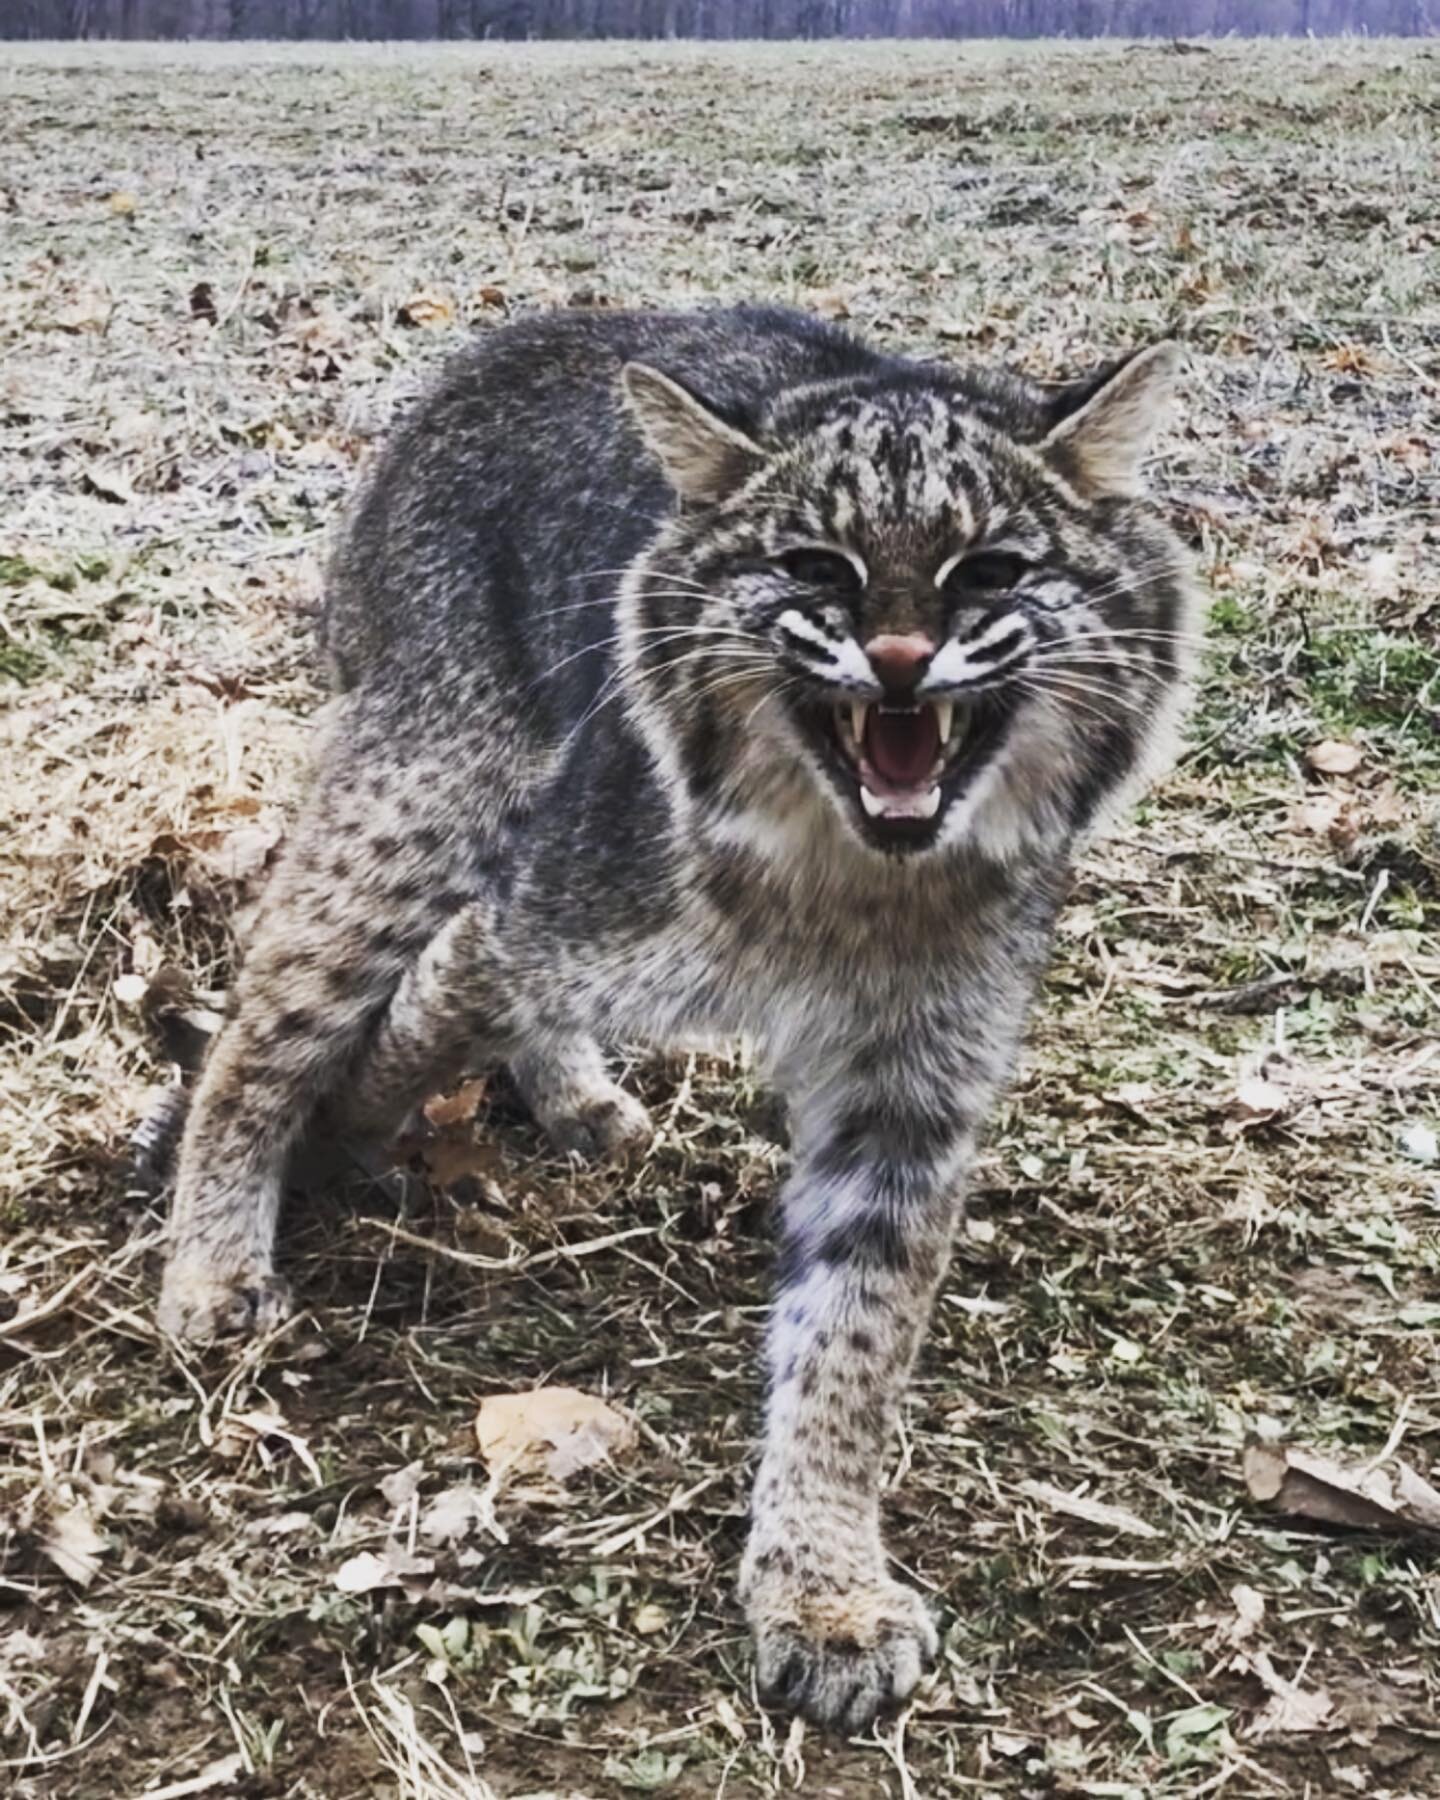 I use to use to think it was so amazing catching an incidental bobcat, but now&hellip;. They are honestly worse than releasing a opossum or raccoon. Last season I caught 14 incidentals, this year I only caught 3. The only difference was I changed my 